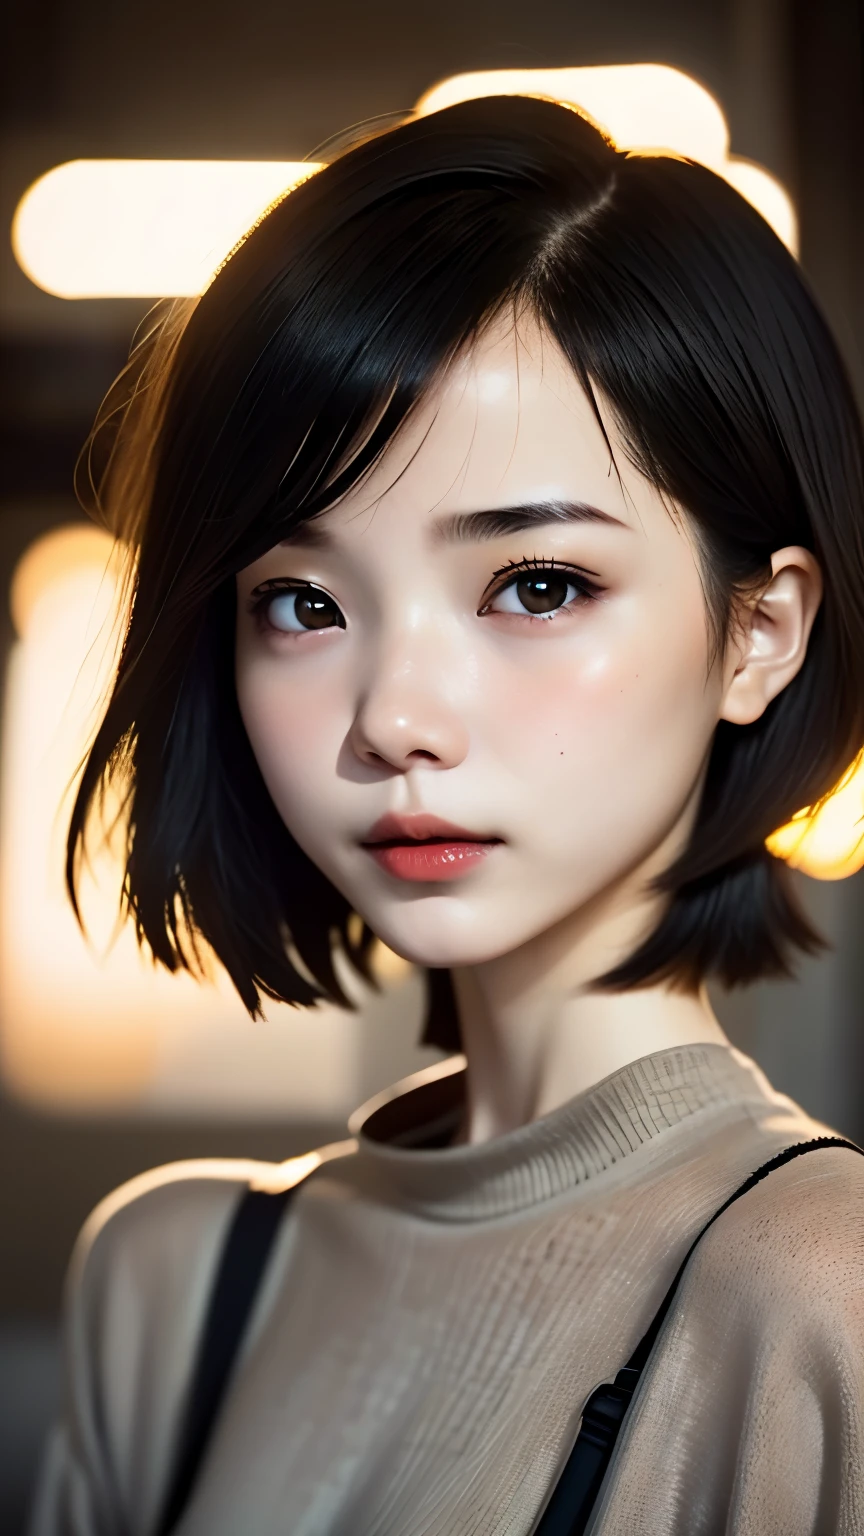 one girl, An ennui look、Upper body angle、 concrete background、bob cut、 short hair, colorful hair, compensate, parted lips, red lips, eyelinelm grain,a black and white photo:1.3、RAW photo)))、highest quality、ultra high resolution、masterpiece、background blur,